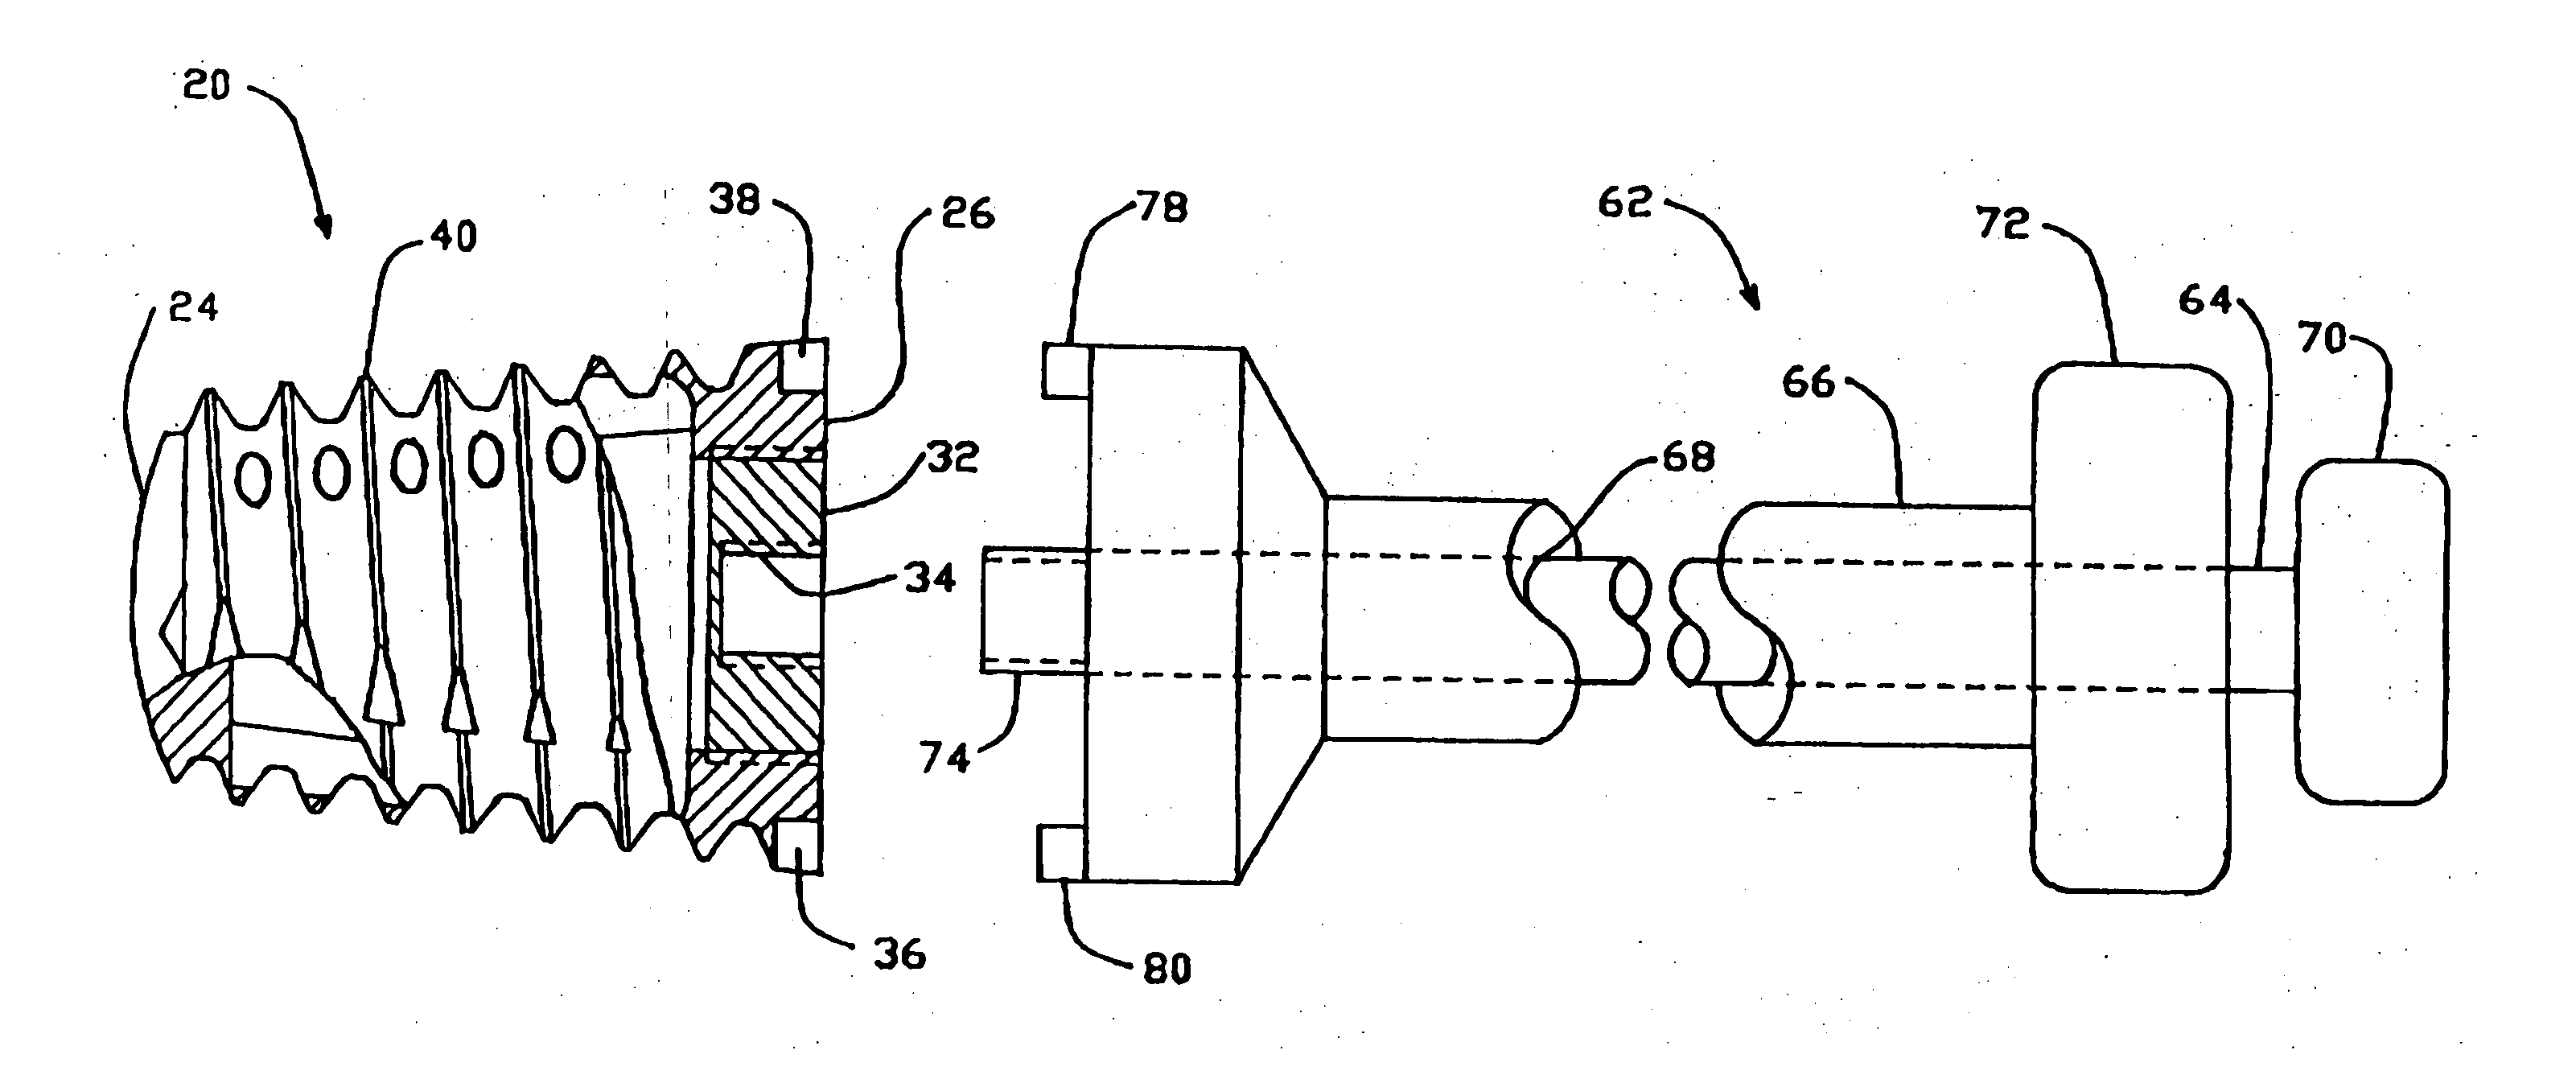 Methods of inserting conically-shaped fusion cages